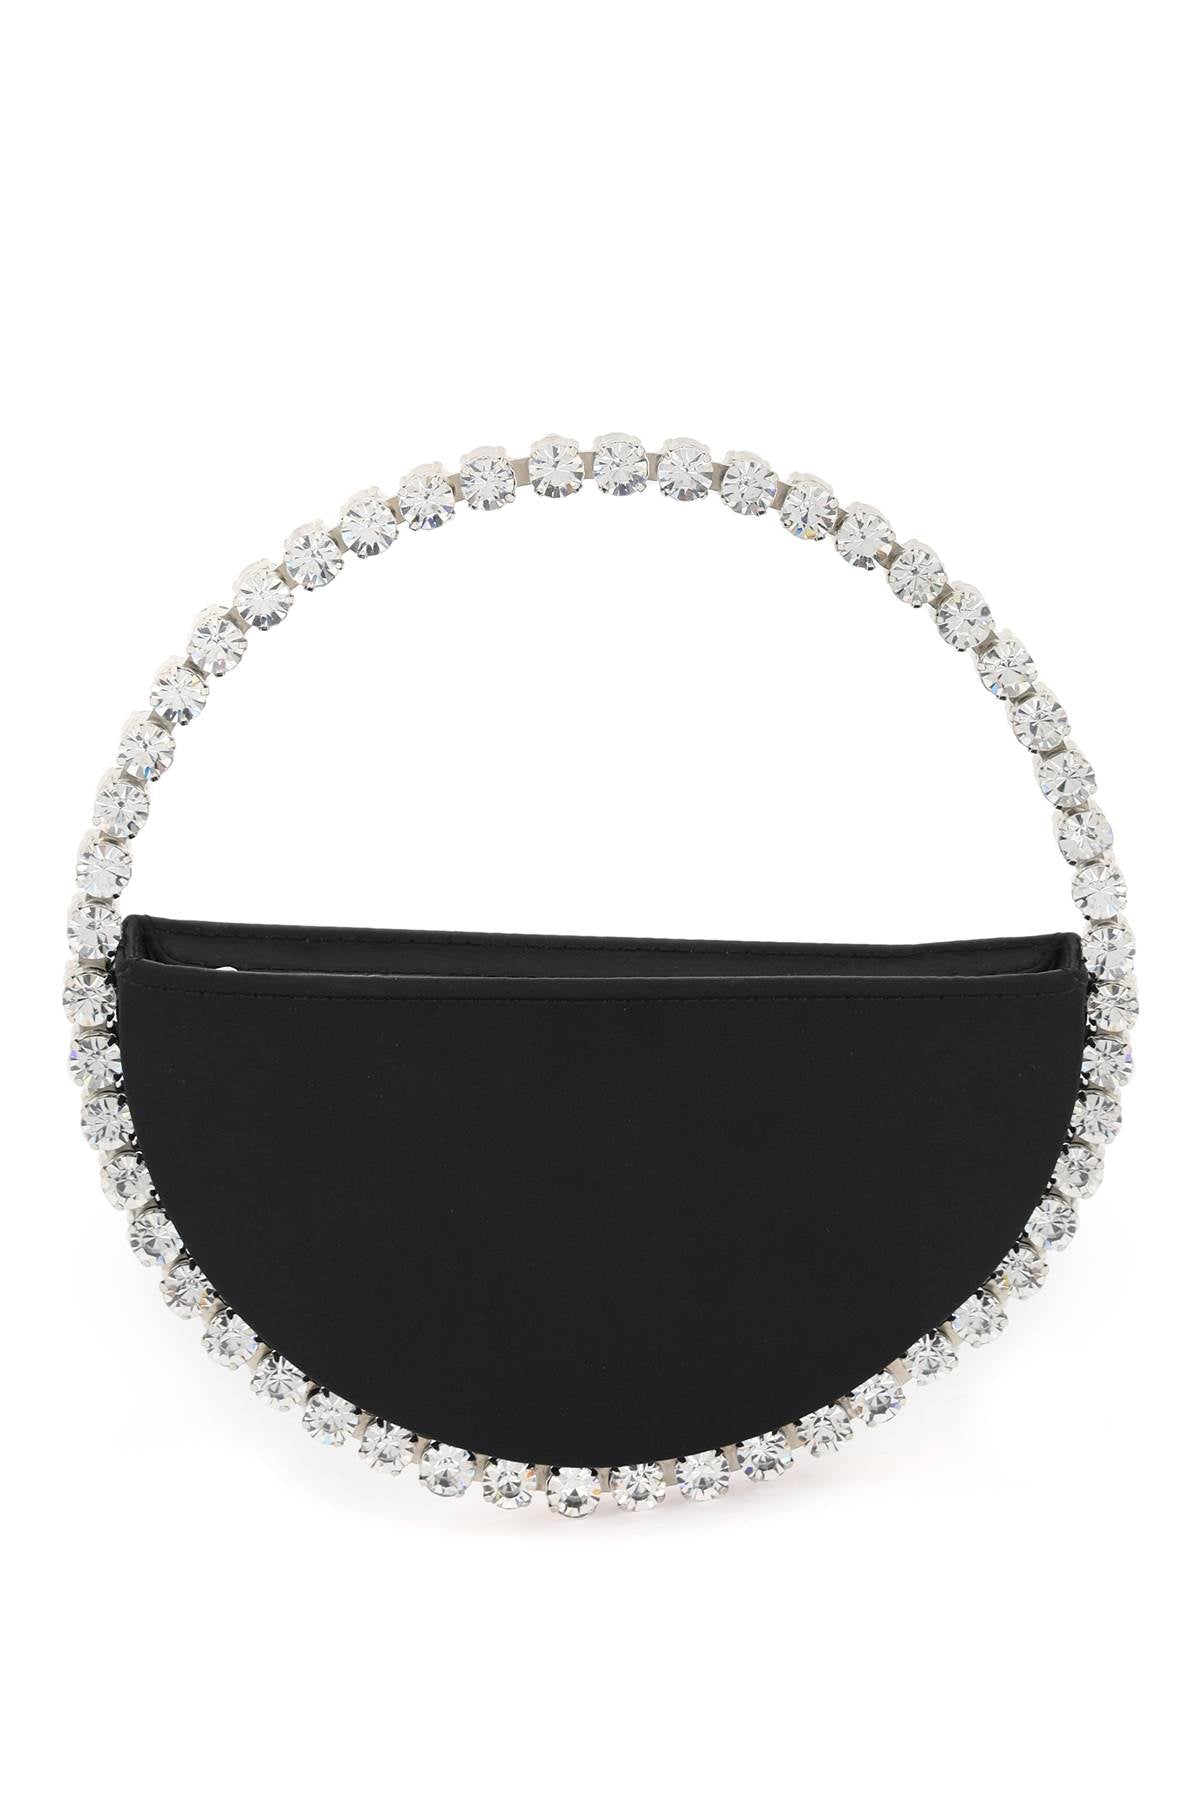 L'alingi Glamorous Eternity Clutch With Embedded Crystals In Black